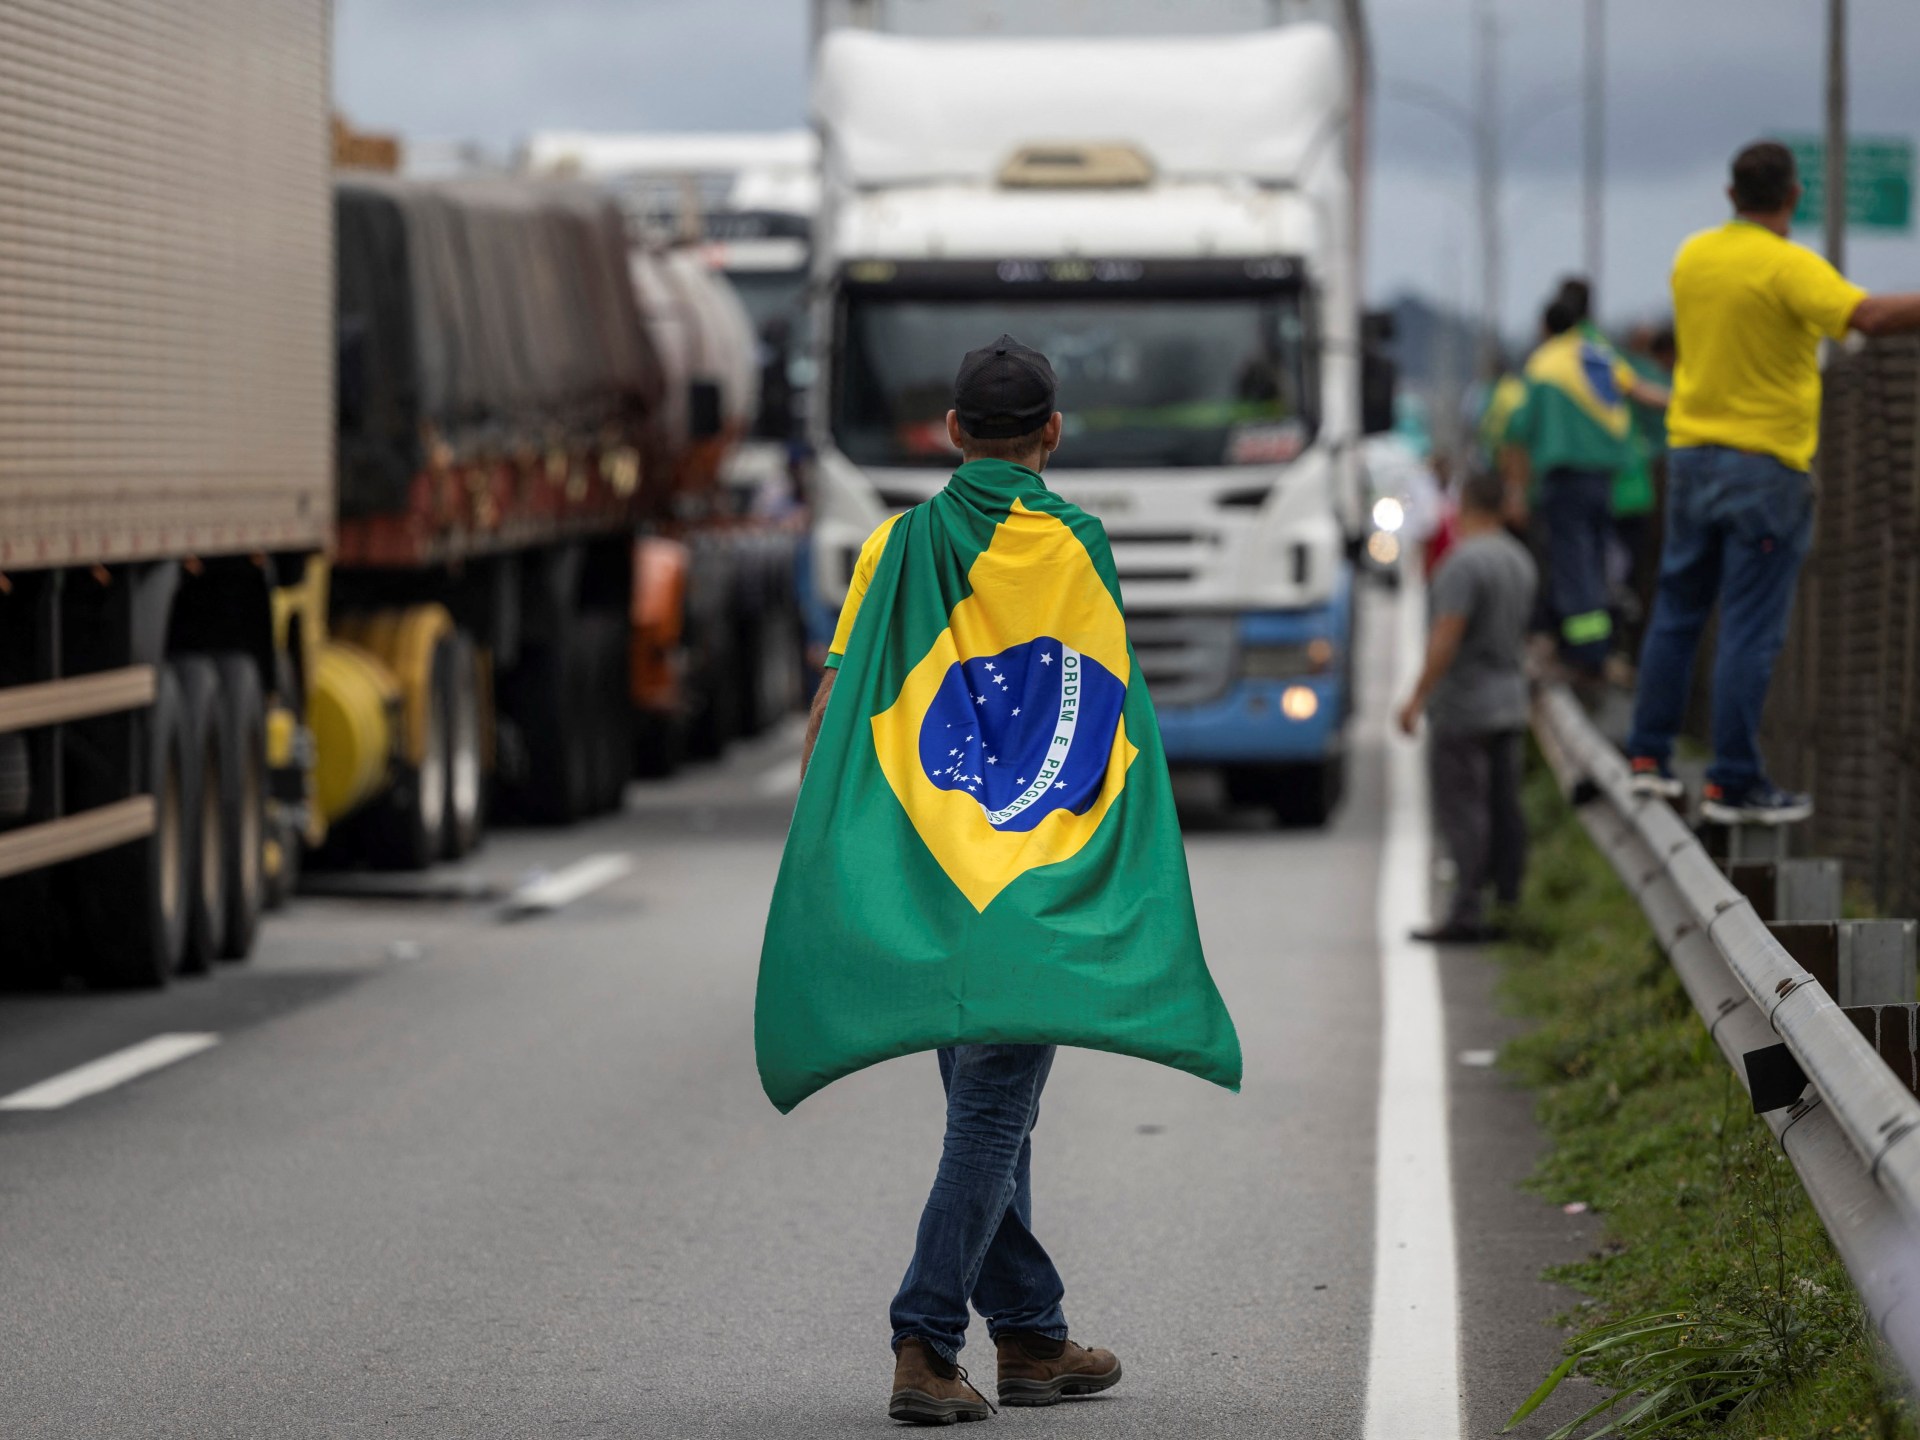 Brazil can’t afford to let Bolsonaro off the hook